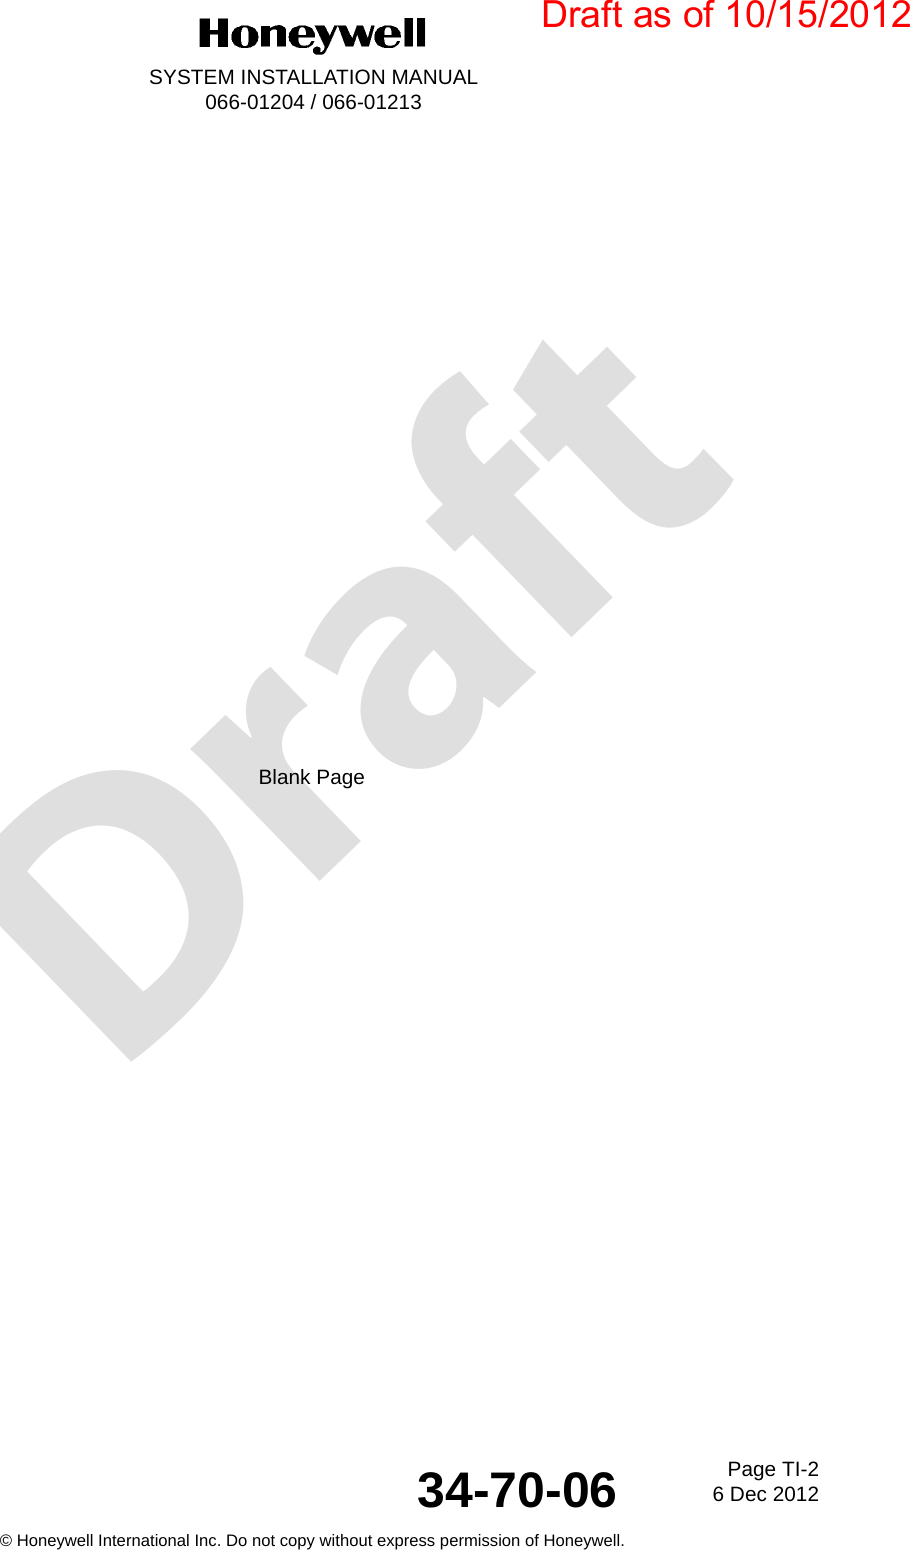 DraftPage TI-26 Dec 201234-70-06SYSTEM INSTALLATION MANUAL066-01204 / 066-01213© Honeywell International Inc. Do not copy without express permission of Honeywell.Blank PageDraft as of 10/15/2012